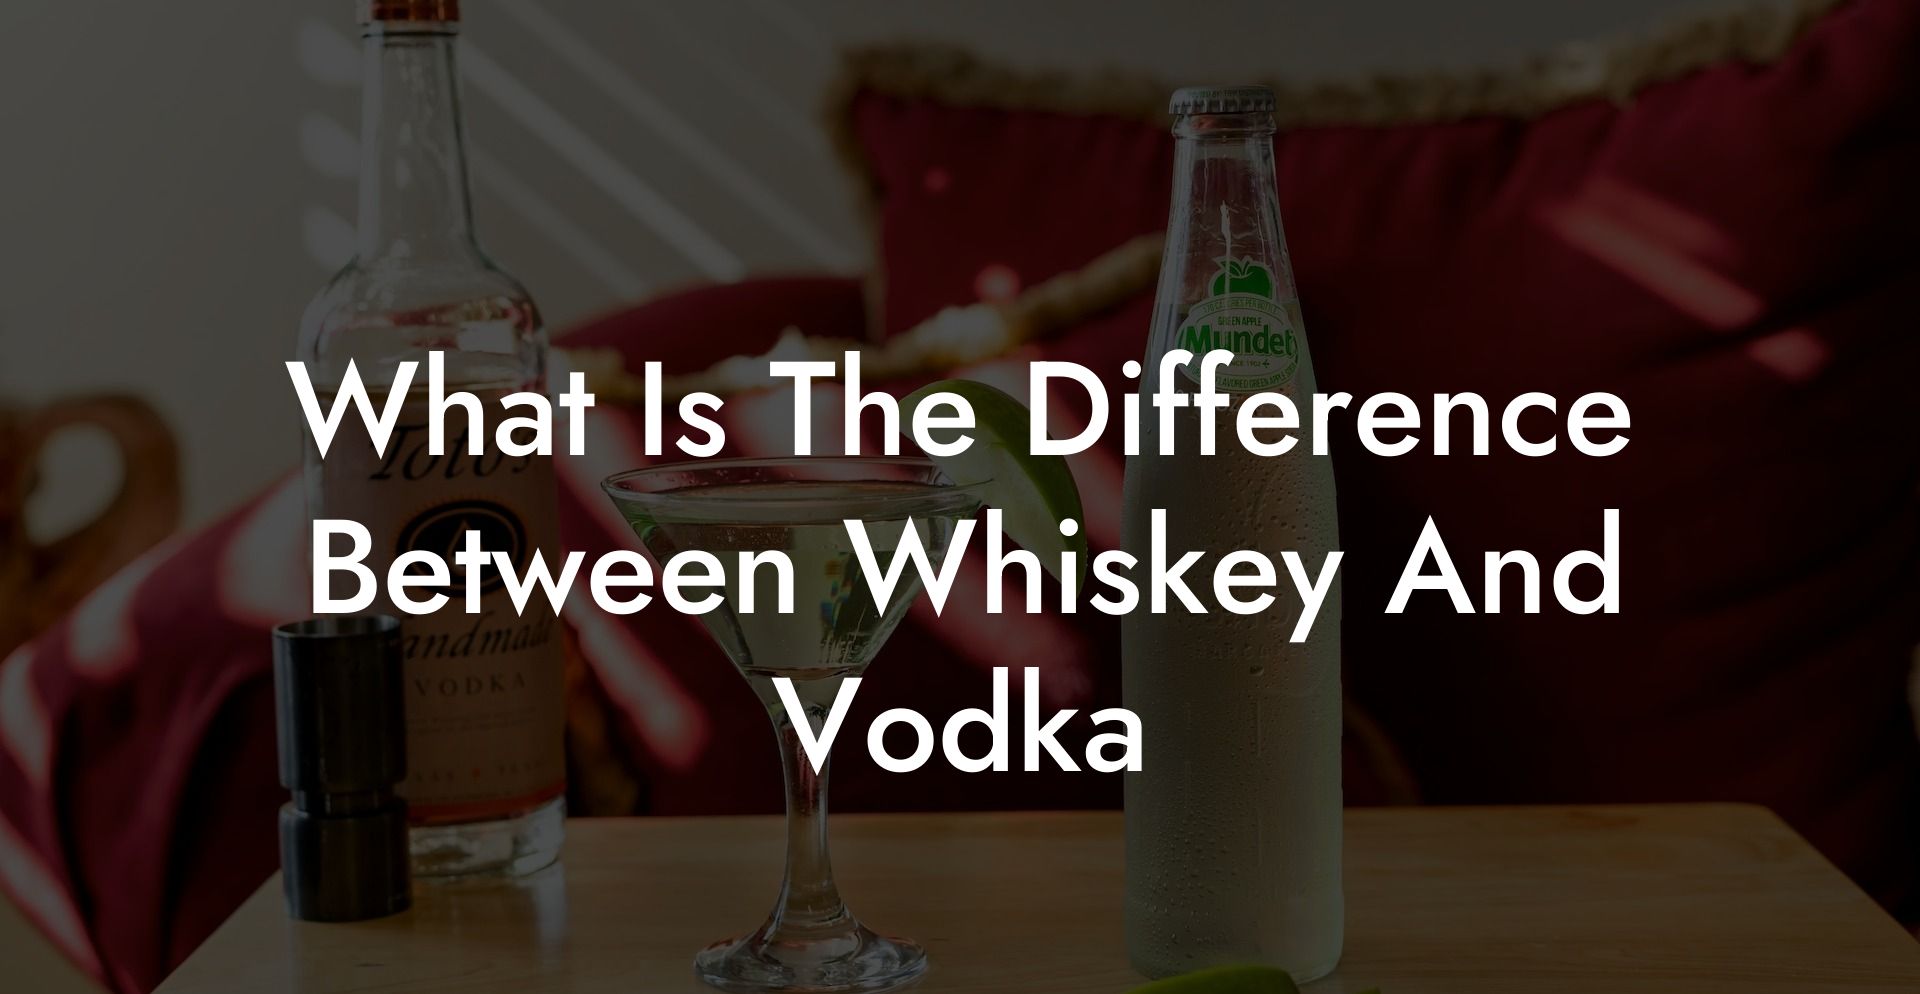 What Is The Difference Between Whiskey And Vodka